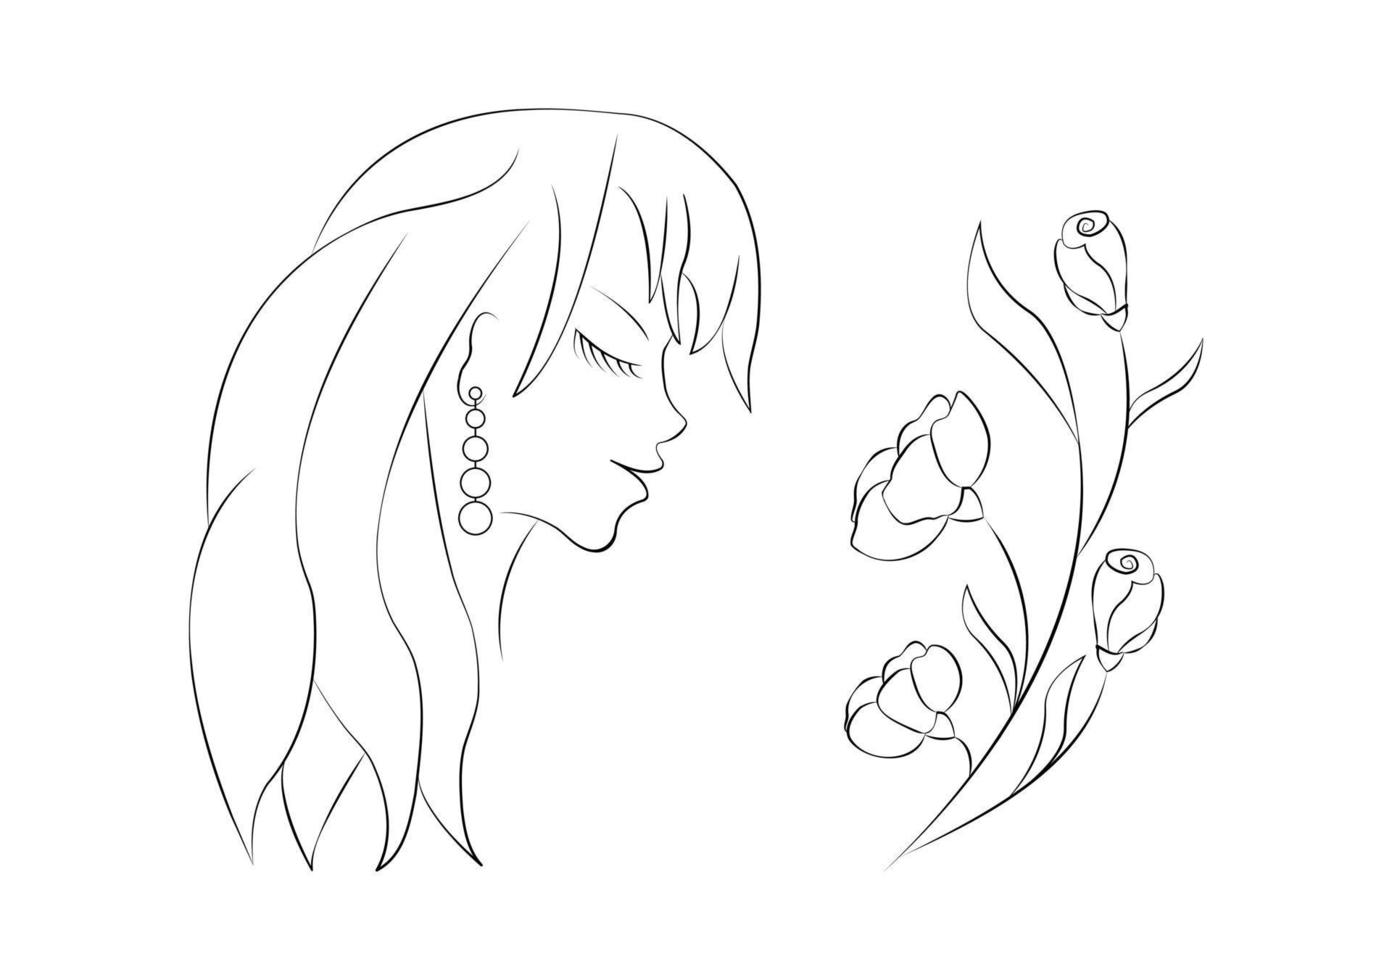 Girl and flowers in line art style. Vector illustration.